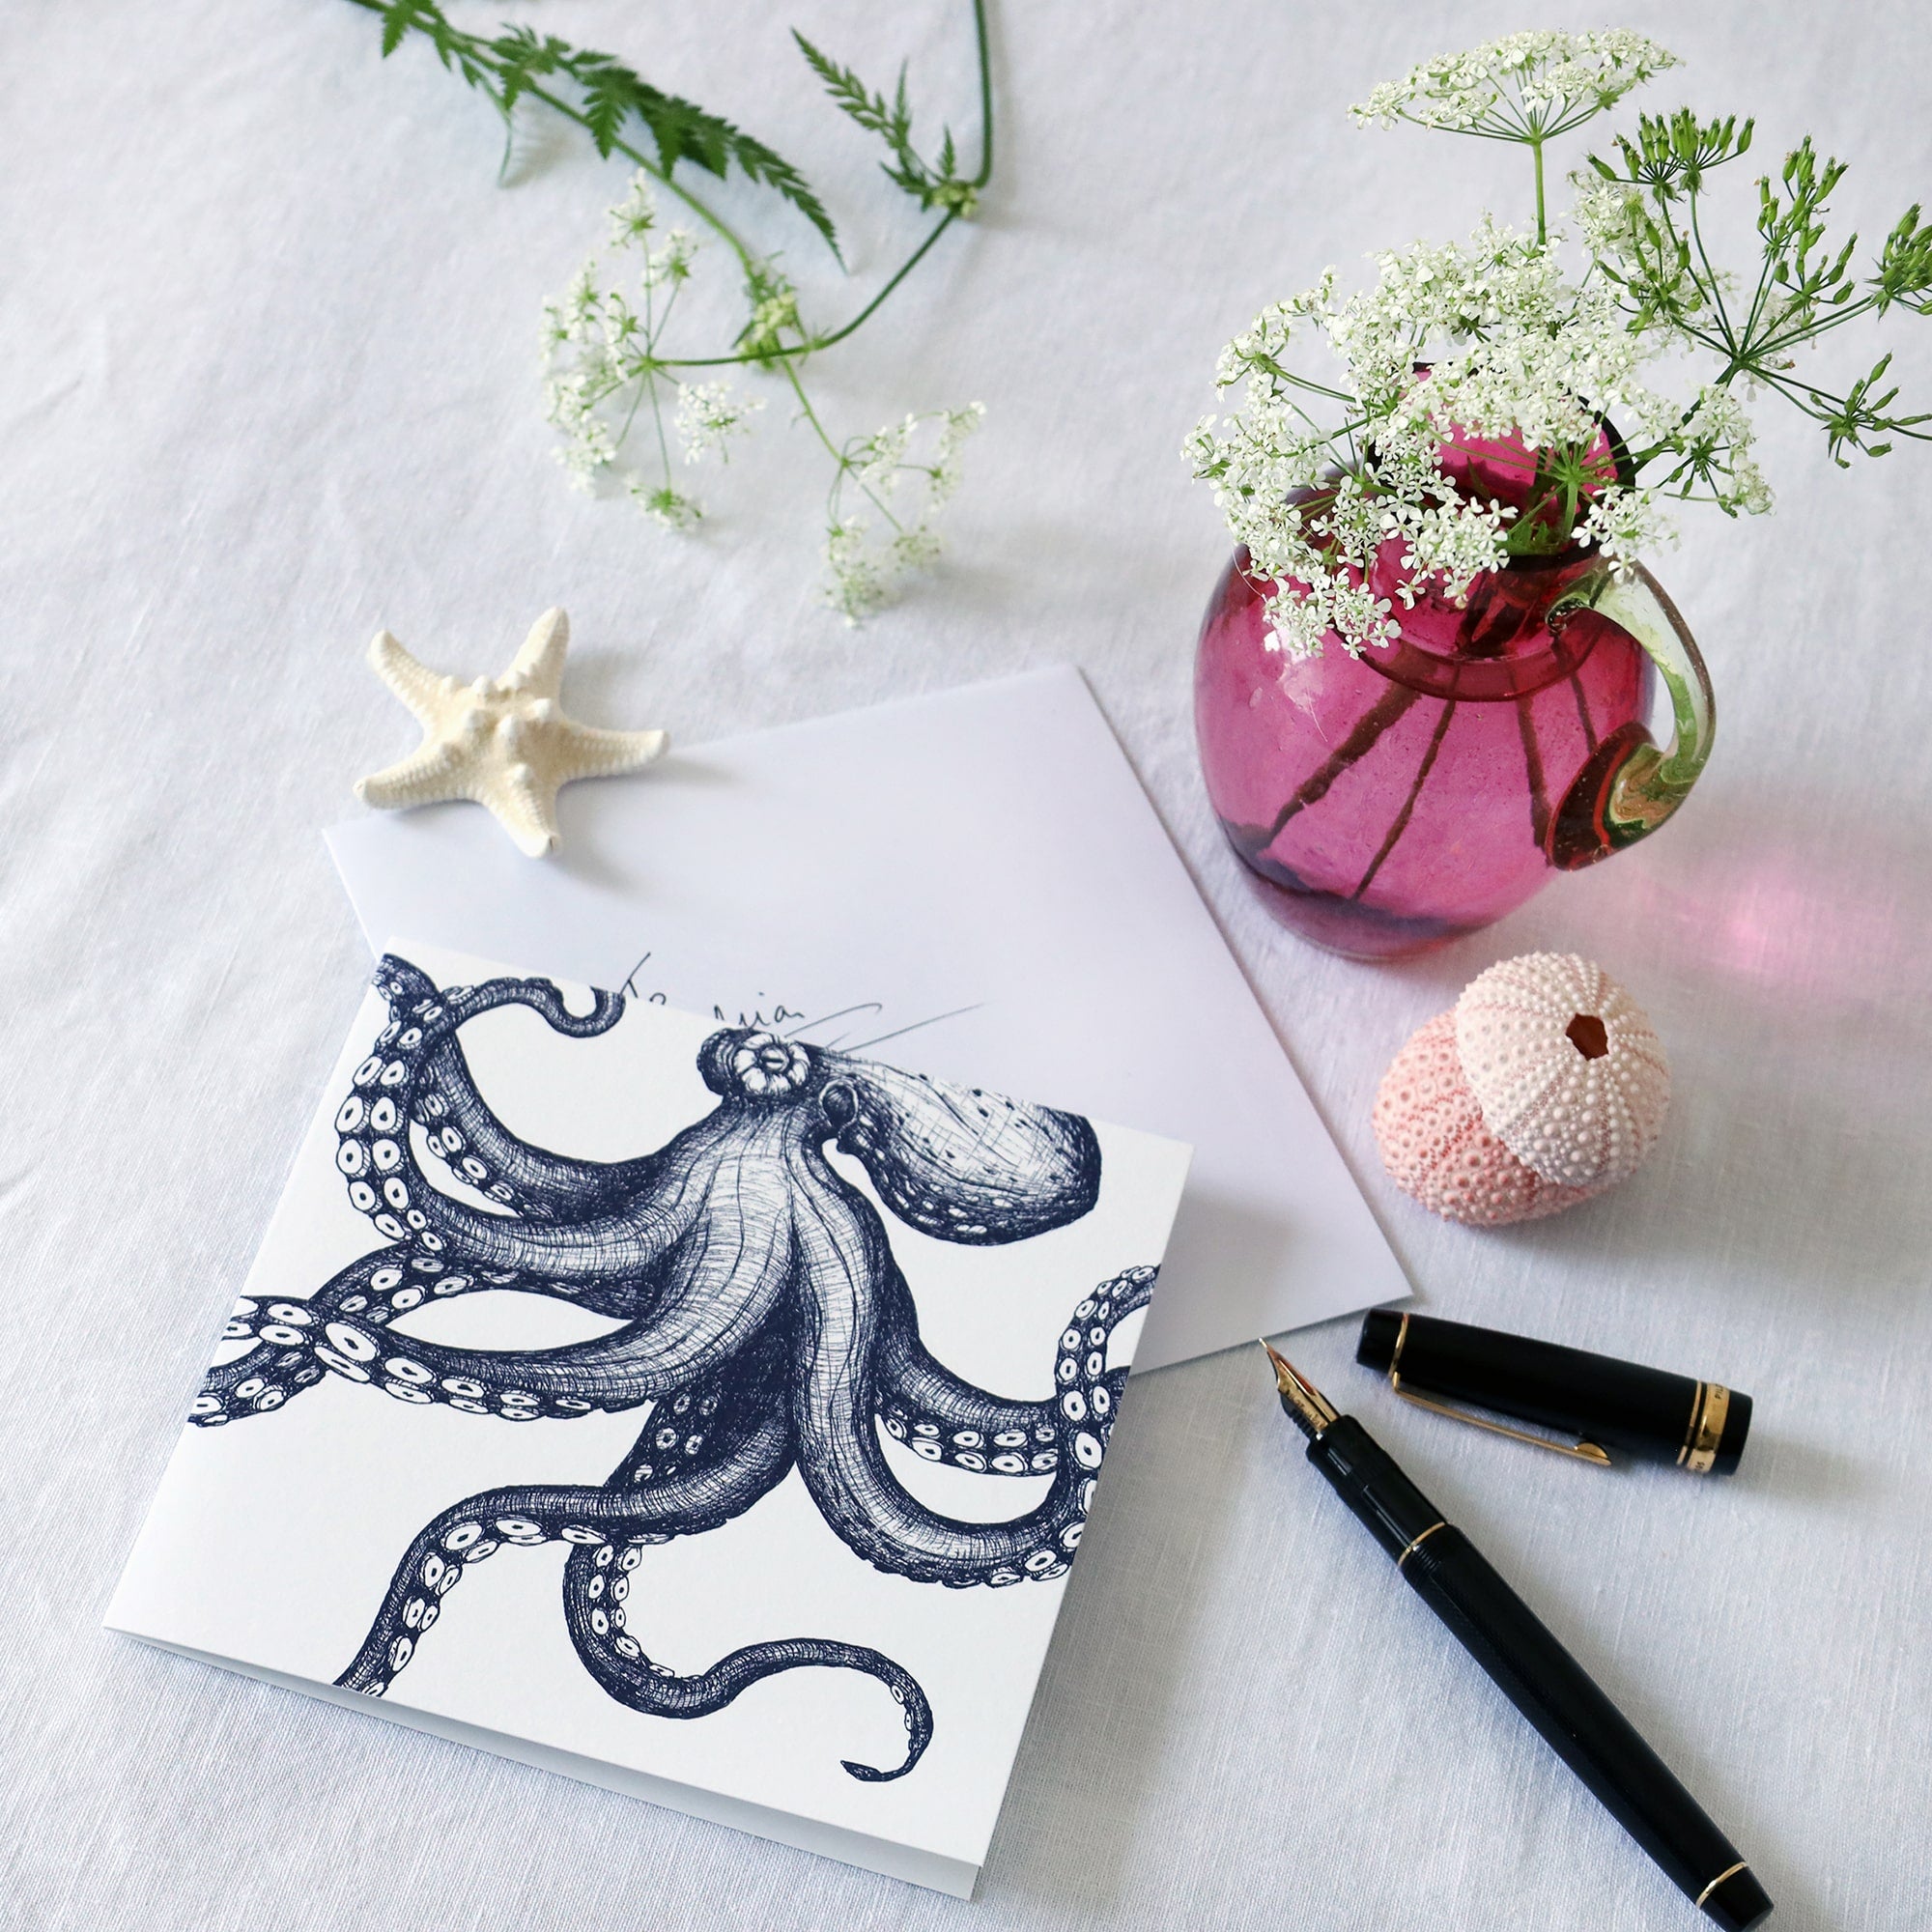 greeting card with navy blue illustrated octopus that looks like it is dancing across the card lying on a white table cloth with a fountain pen, hand written envelope shells and a small cranberry glass jug with wild flowers in